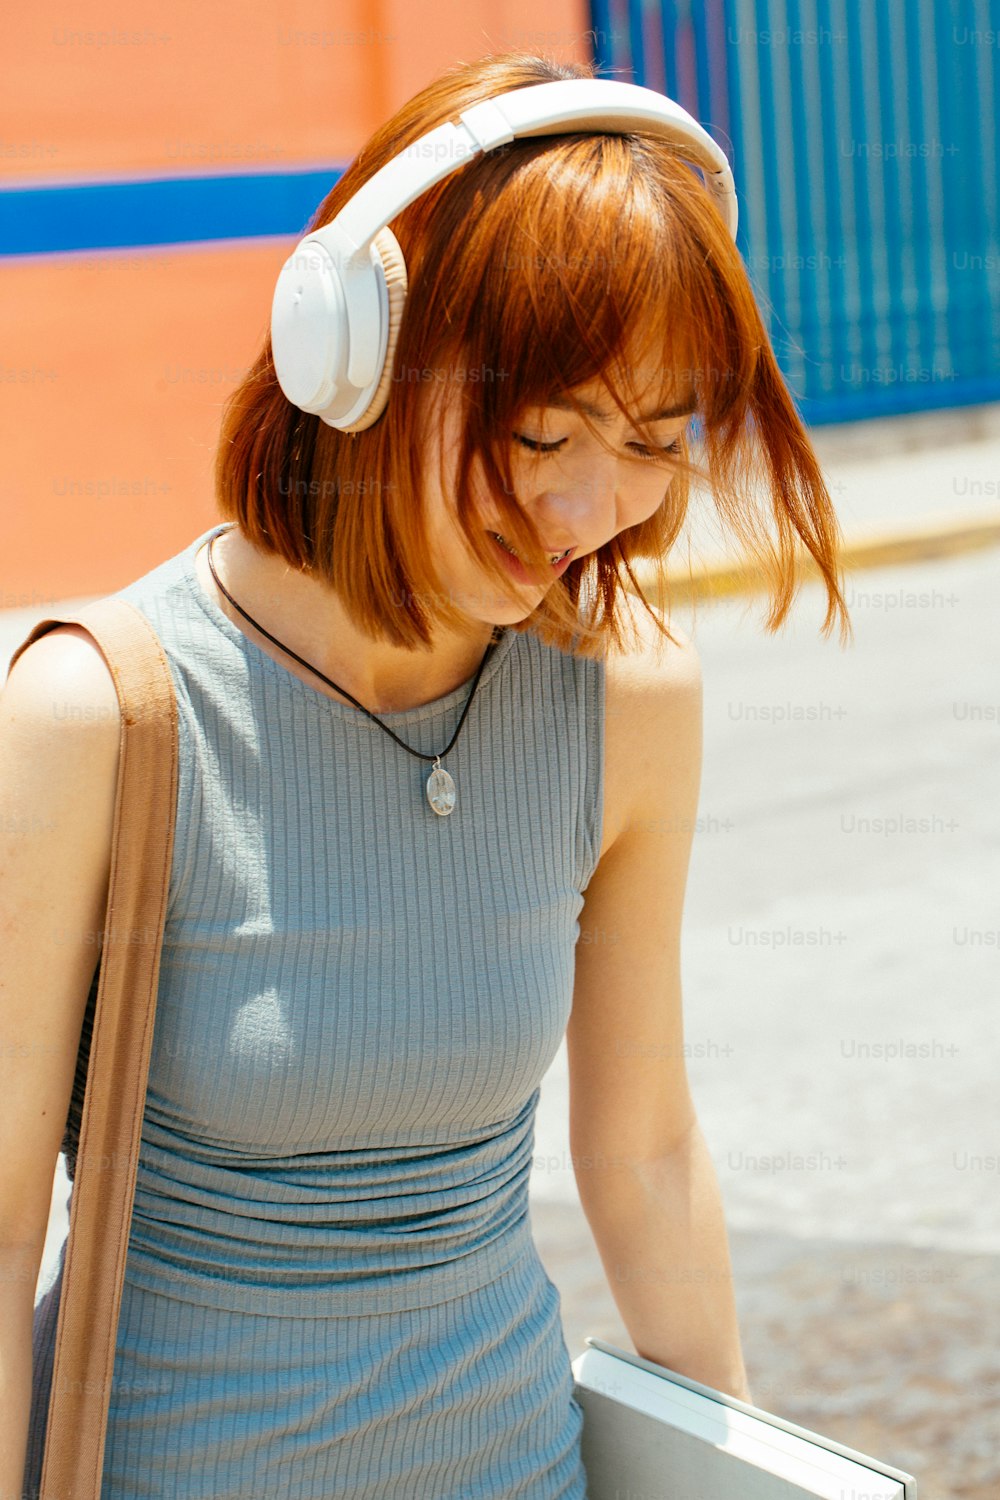 a woman walking down a street with headphones on